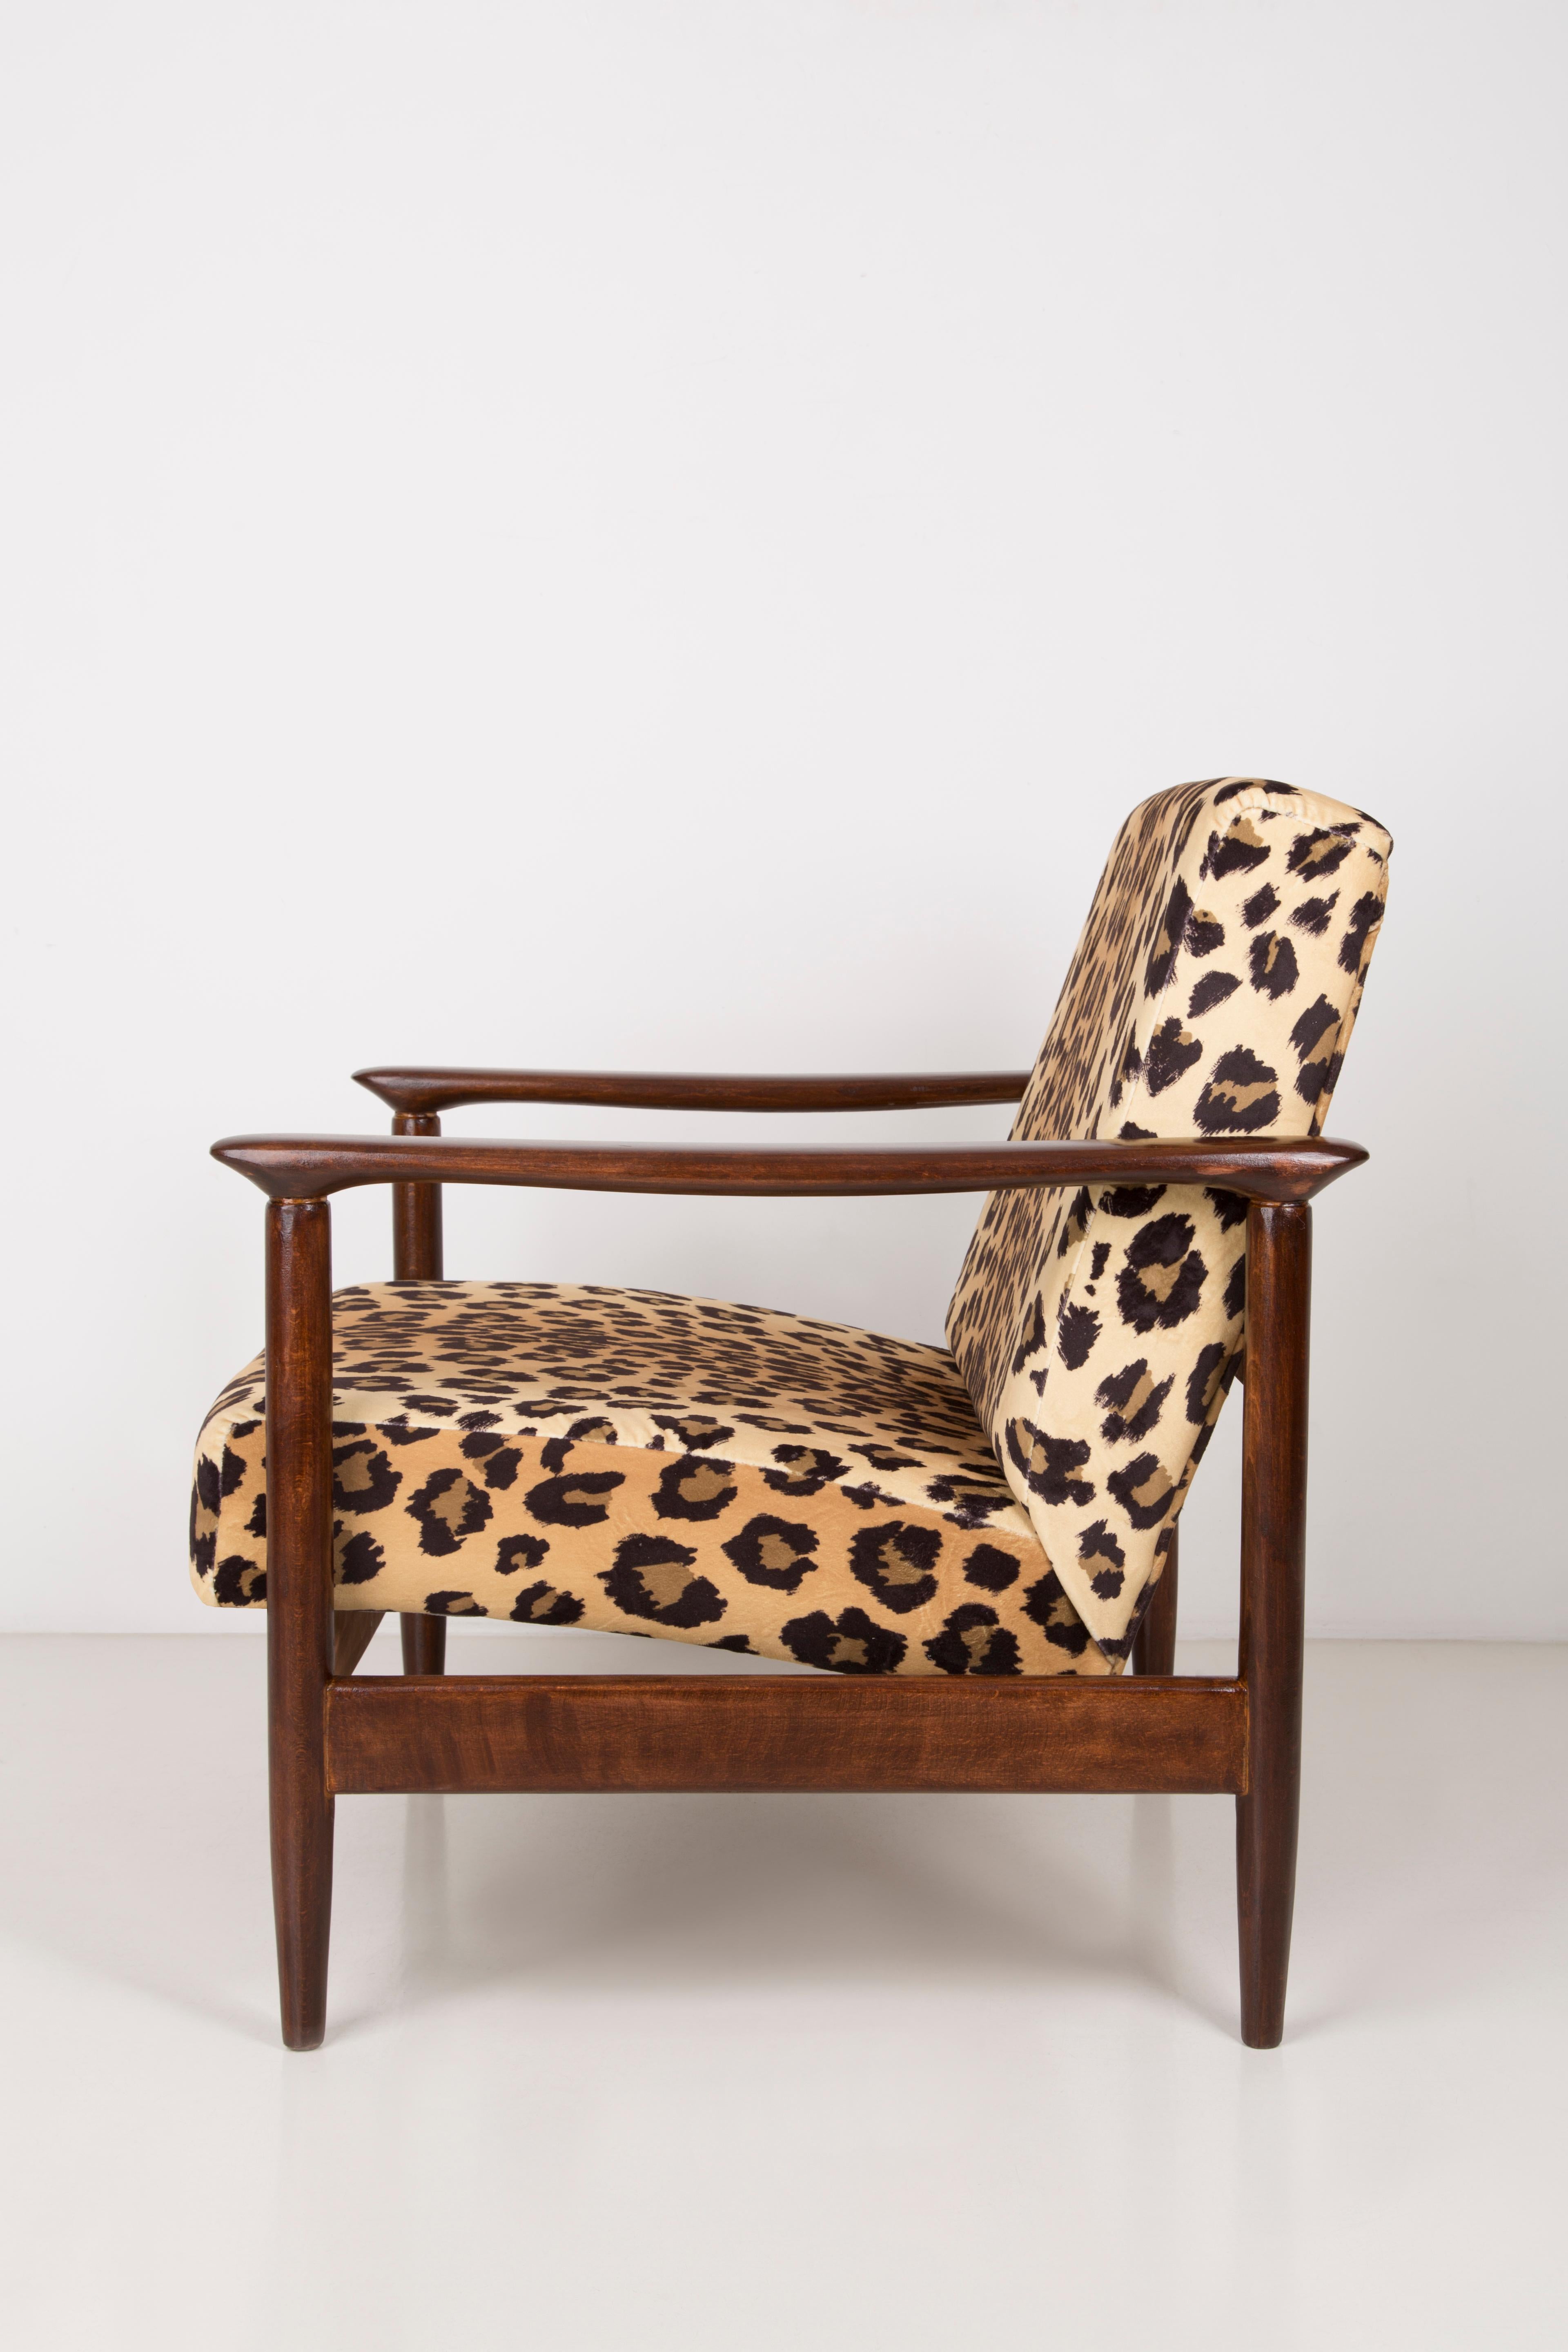 Hand-Crafted Pair of Leopard Print Velvet Armchairs, Edmund Homa, GFM-142, 1960s, Poland For Sale